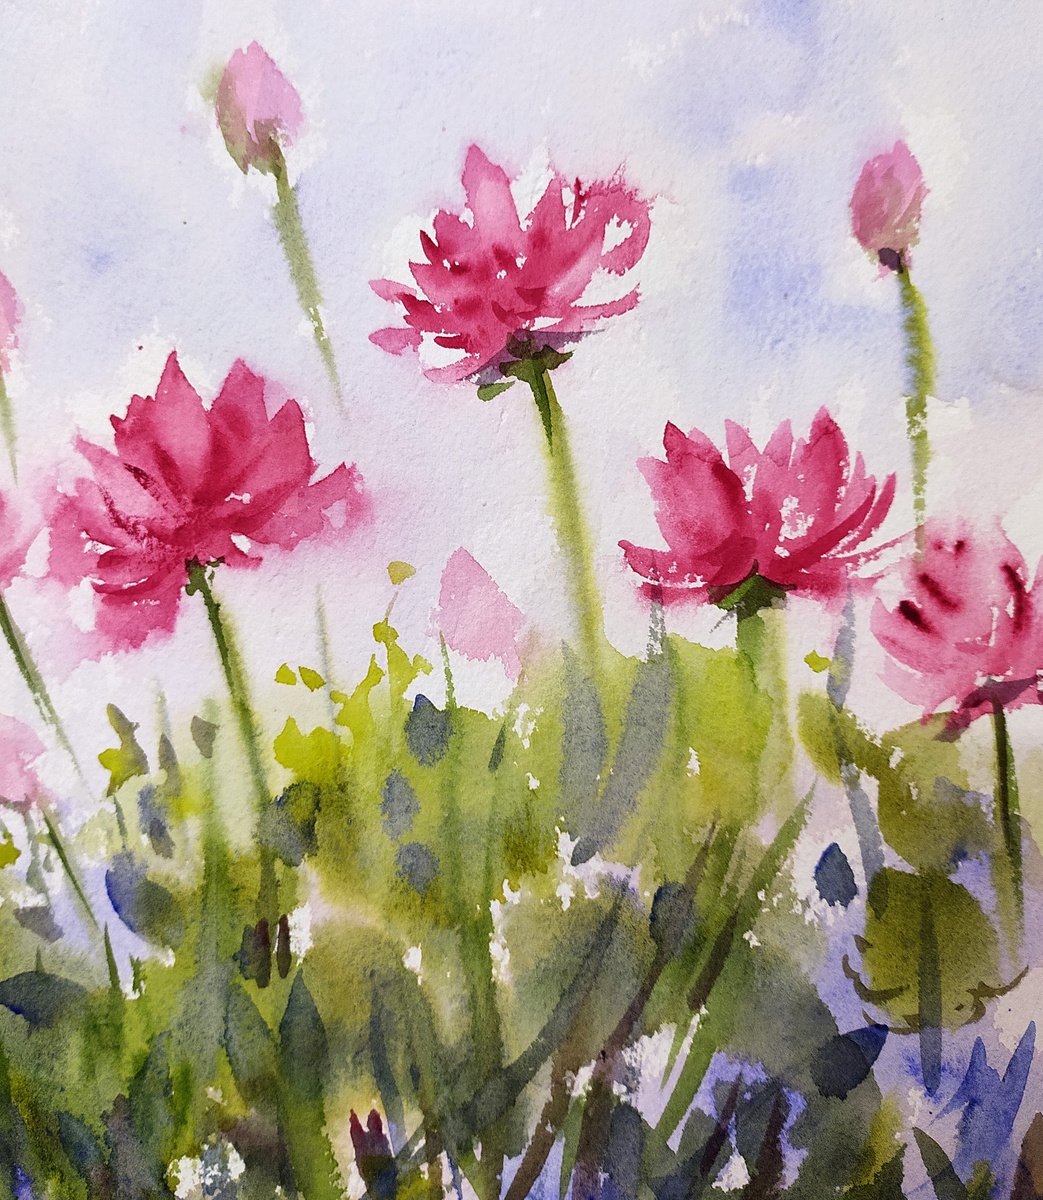 Crimson water lilies 1 - Waterlilies- Lotus in watercolours on paper by Asha Shenoy